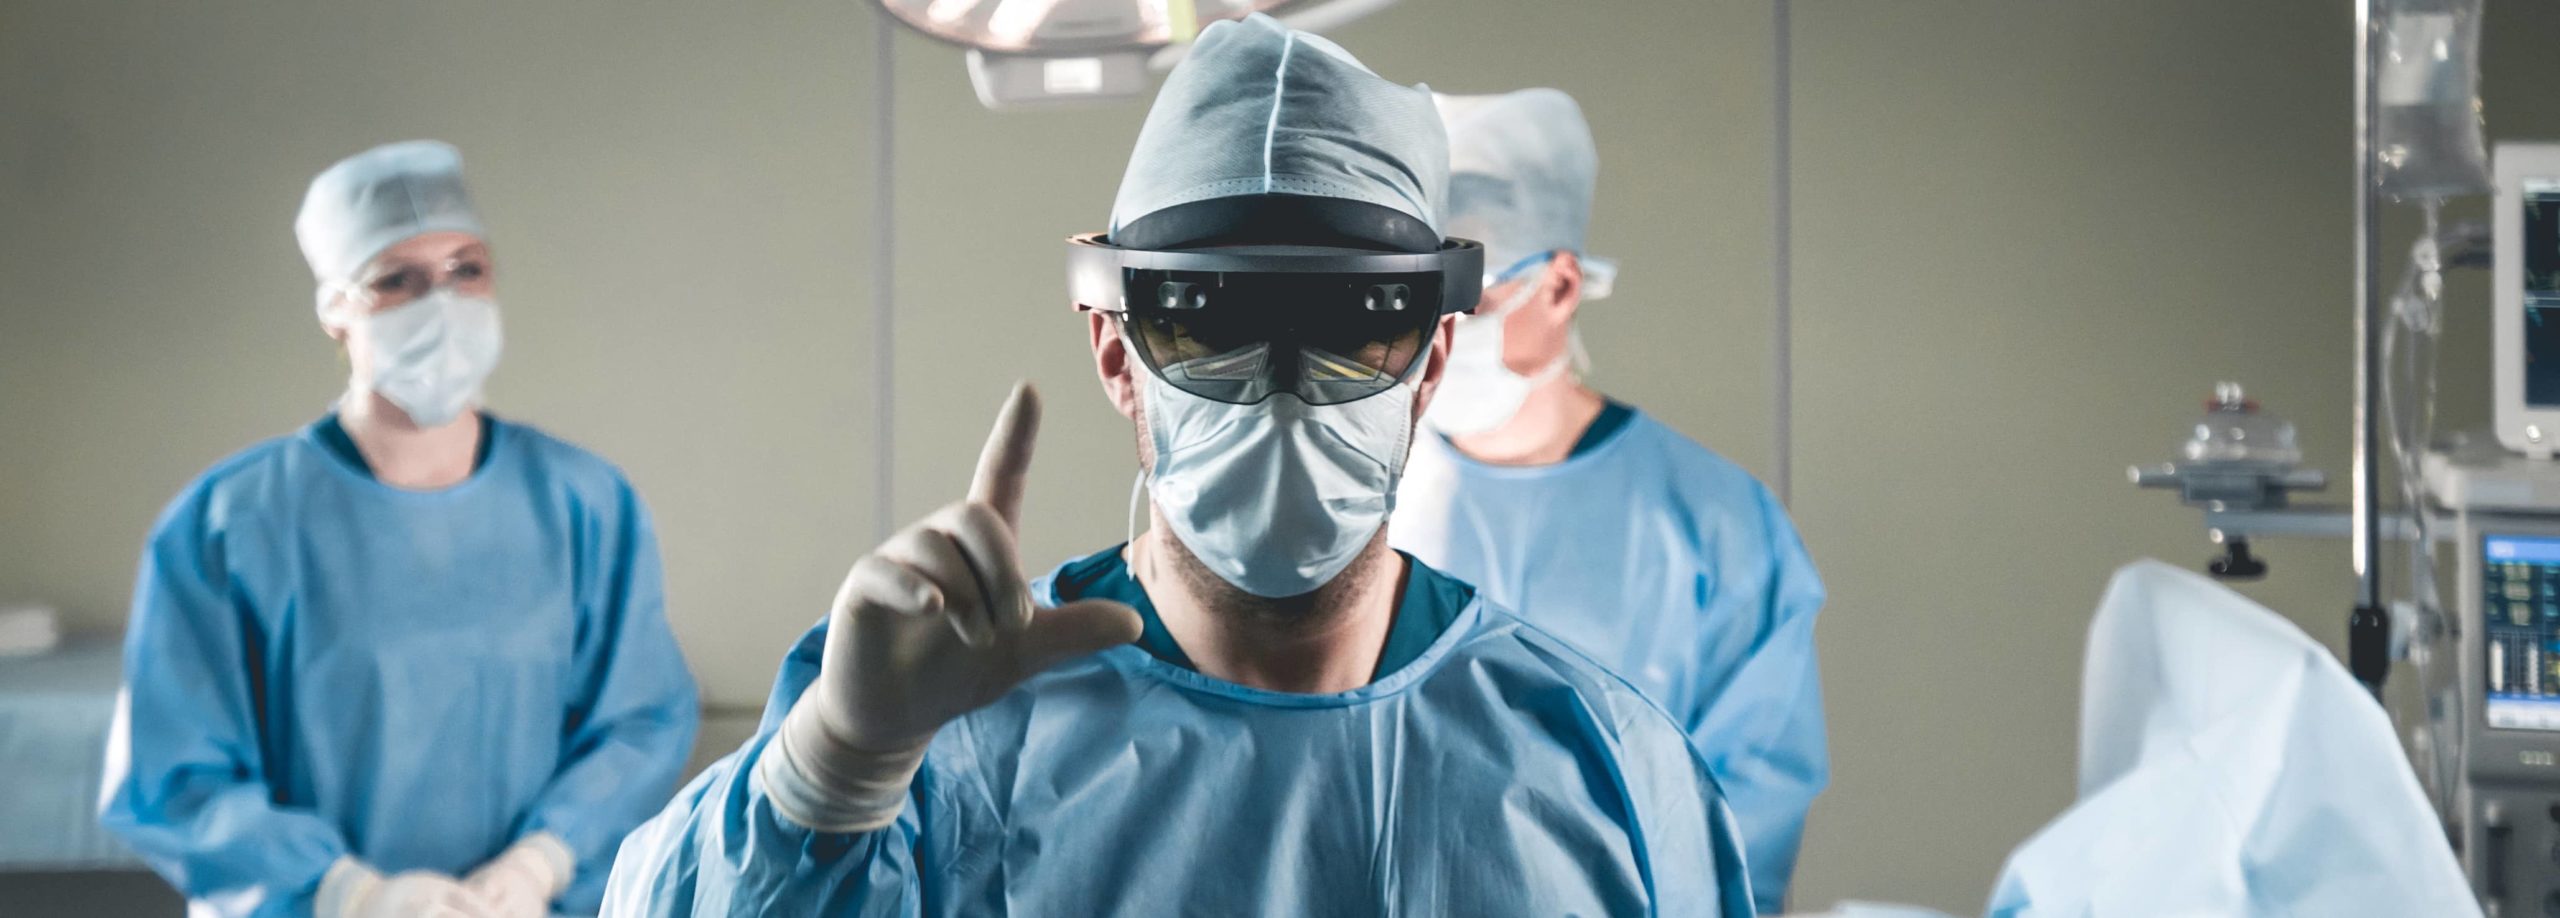 A surgeon wearing PPE and a HoloLens 2 headset in an operating theatre.